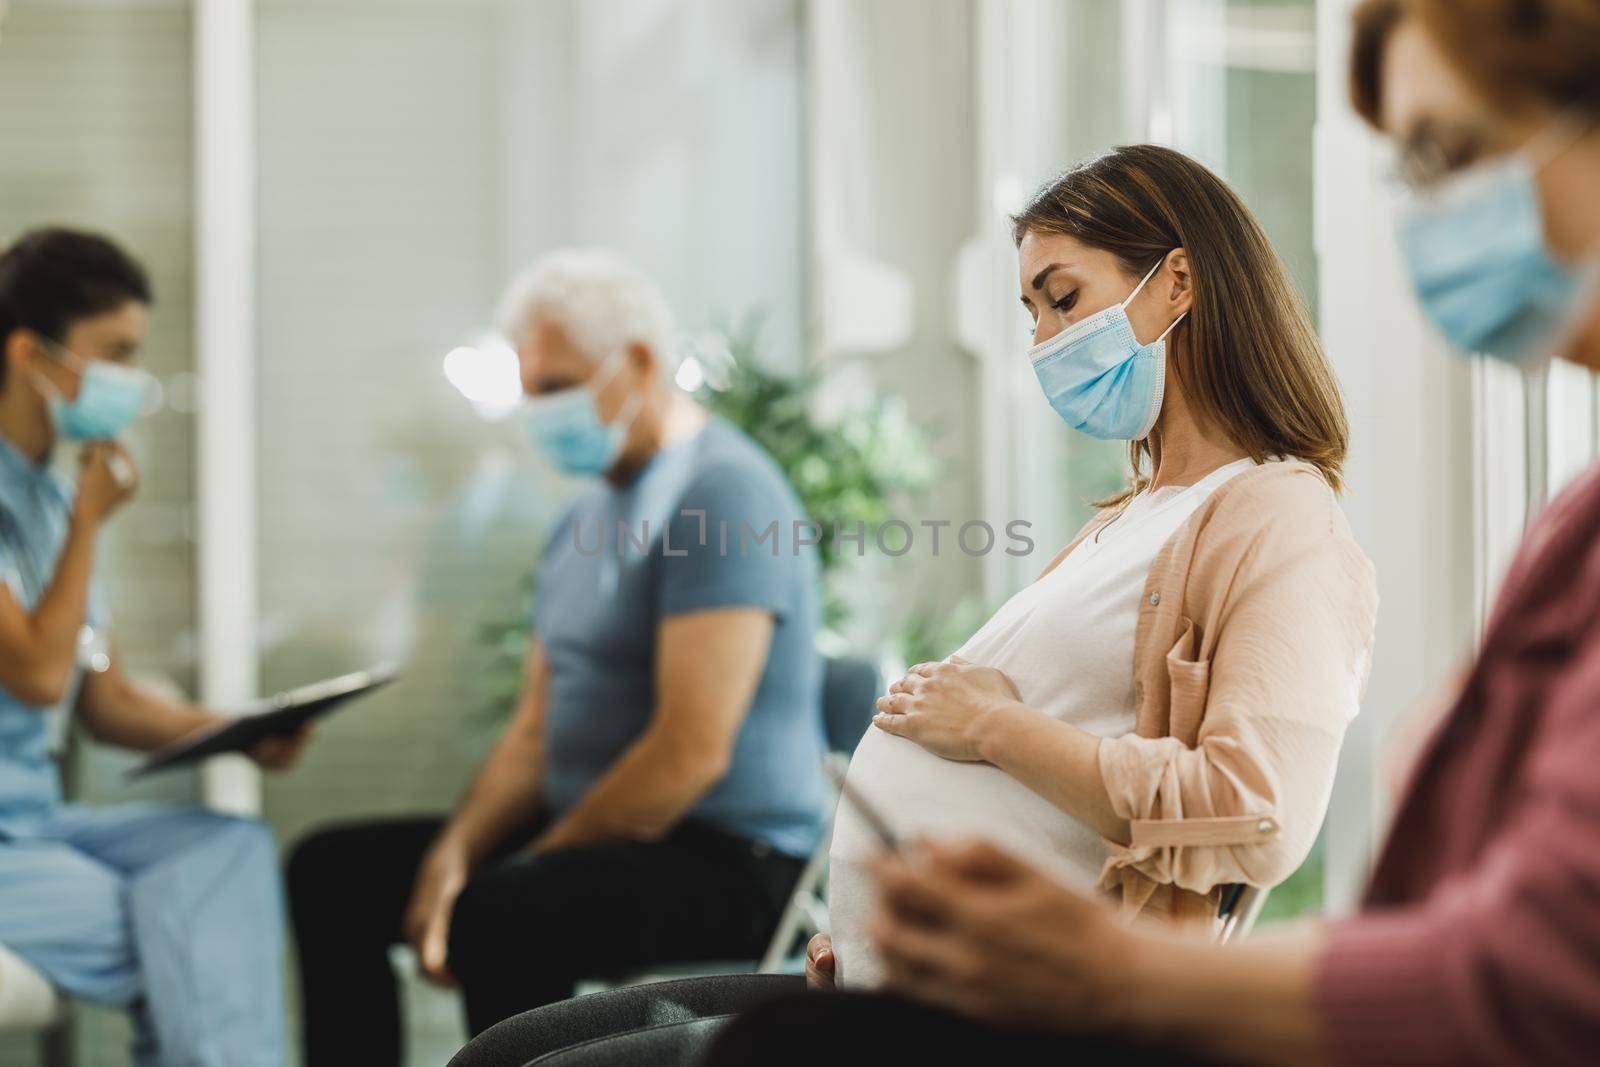 Pregnant Woman With Protective Mask Sitting At The Waiting Room by MilanMarkovic78